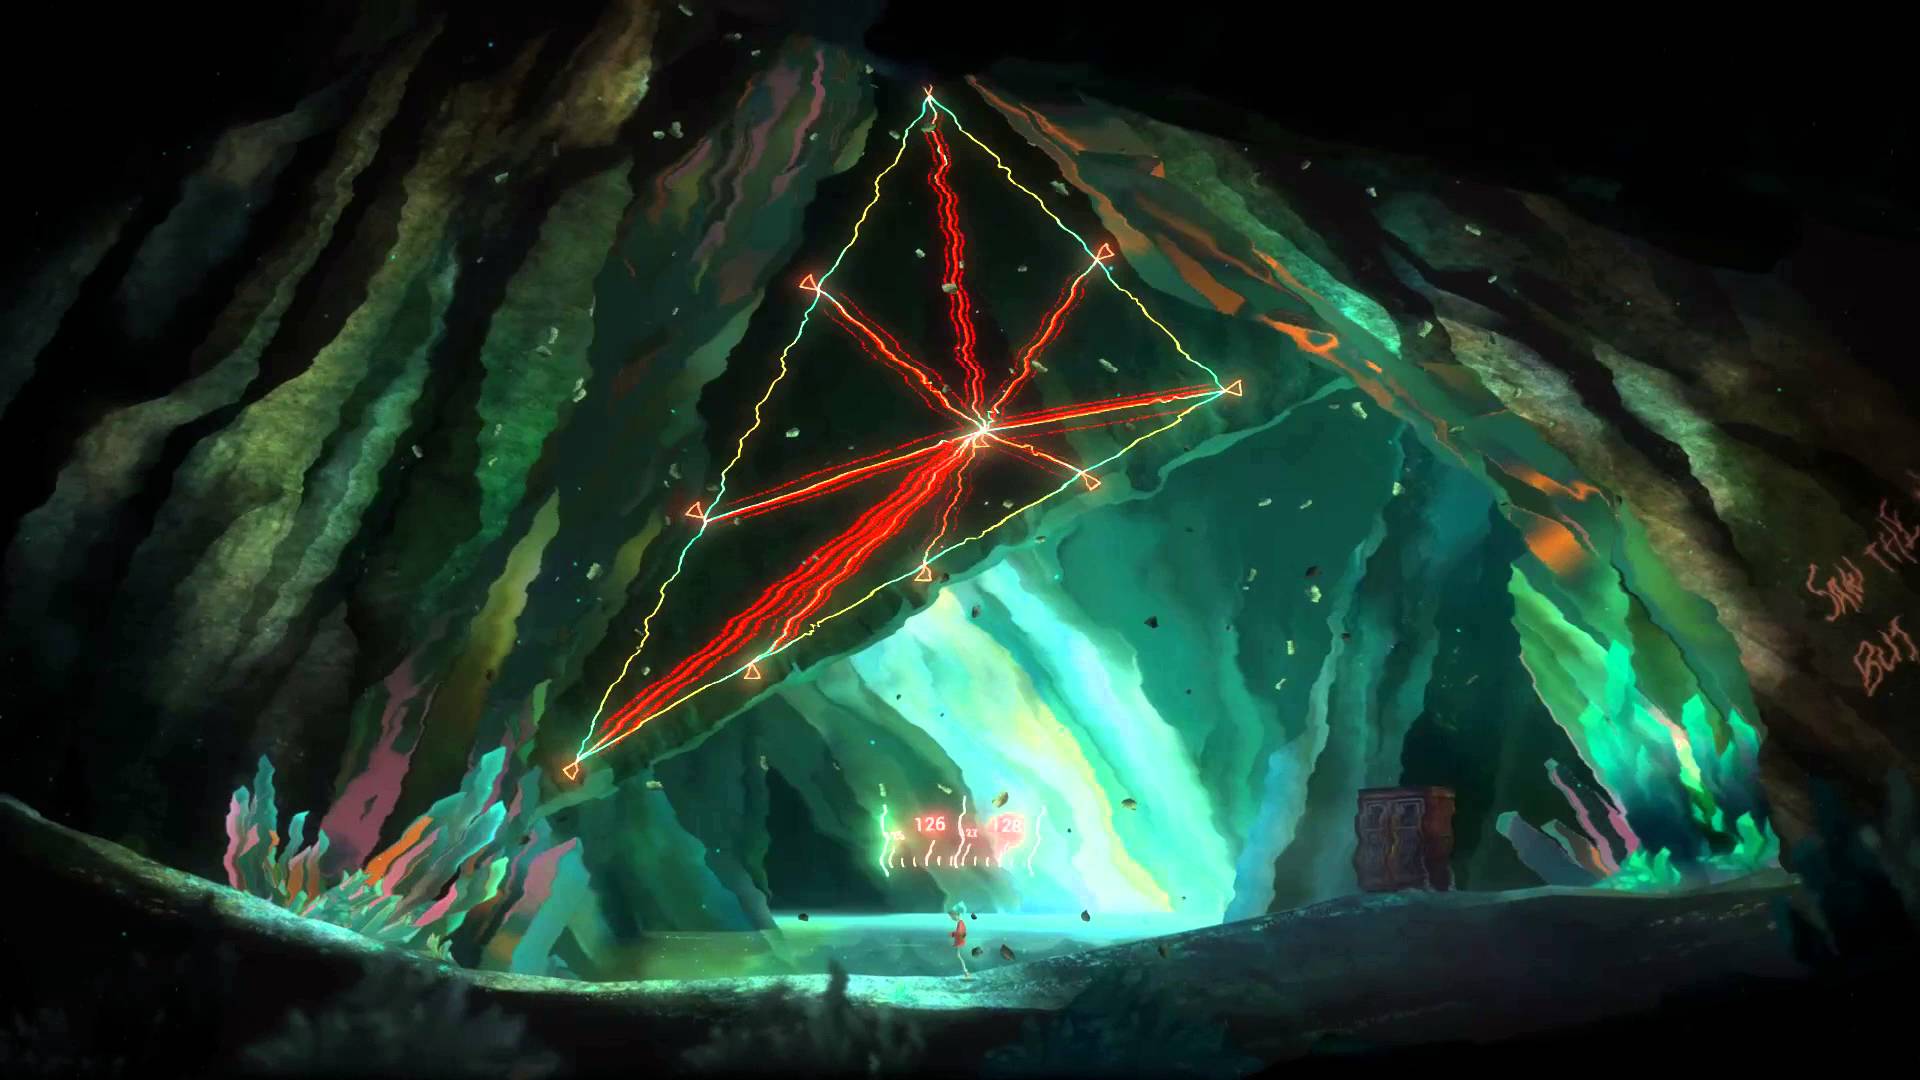 oxenfree game on 2560x1440